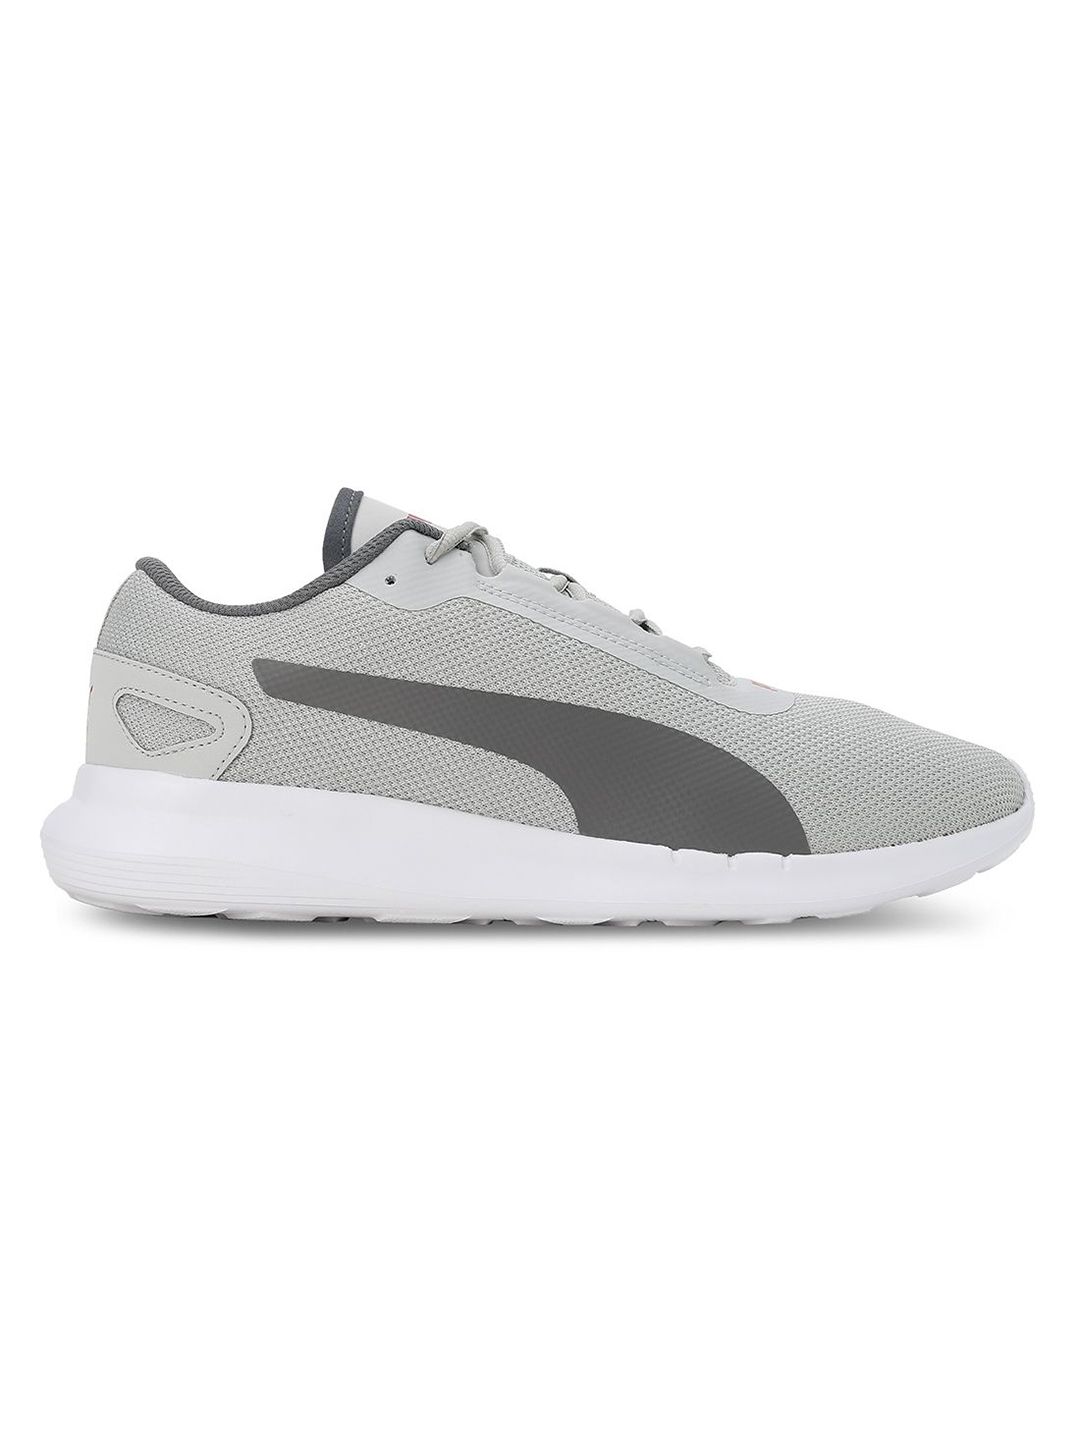 Buy Men Grey & Red Volant Sports Shoes From Fancode Shop.